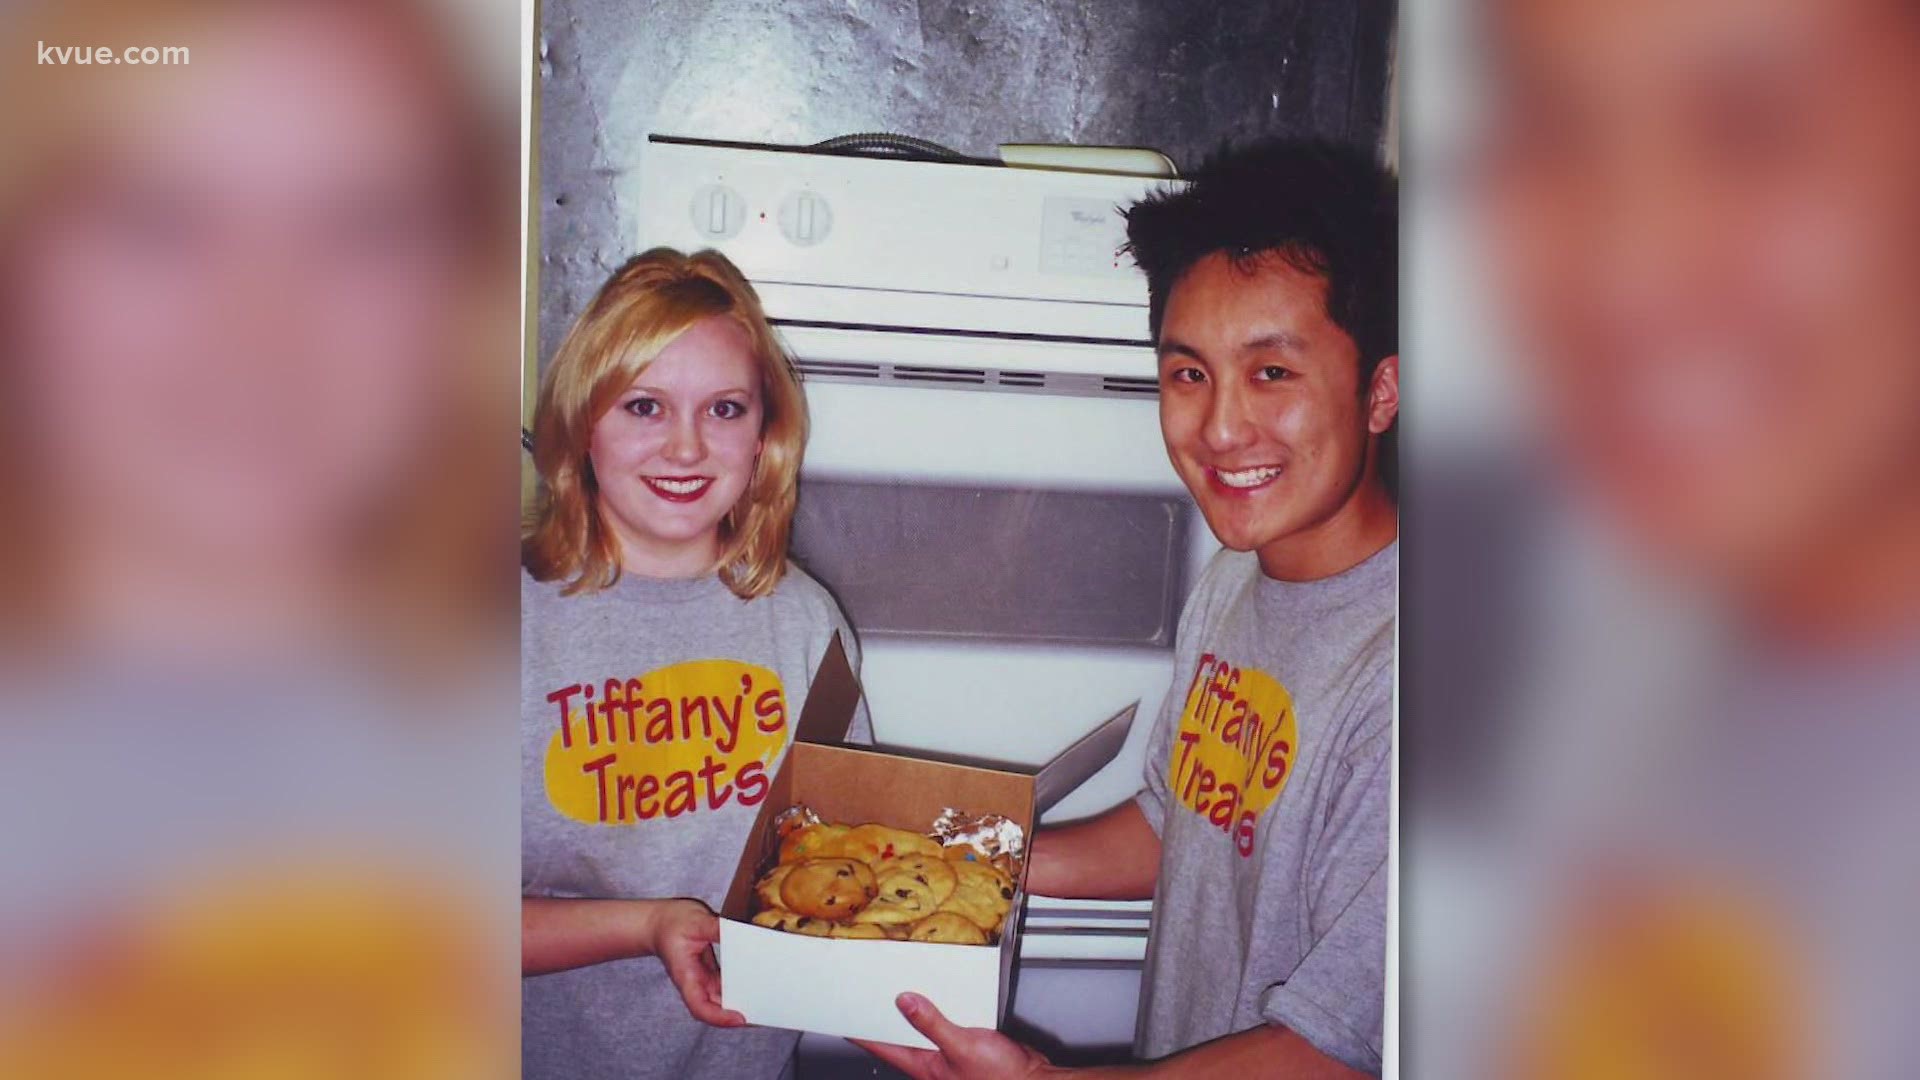 They are looking for a blonde woman named Amy who bought cookies for her boyfriend in 1999 near UT Towers. She tipped $5.